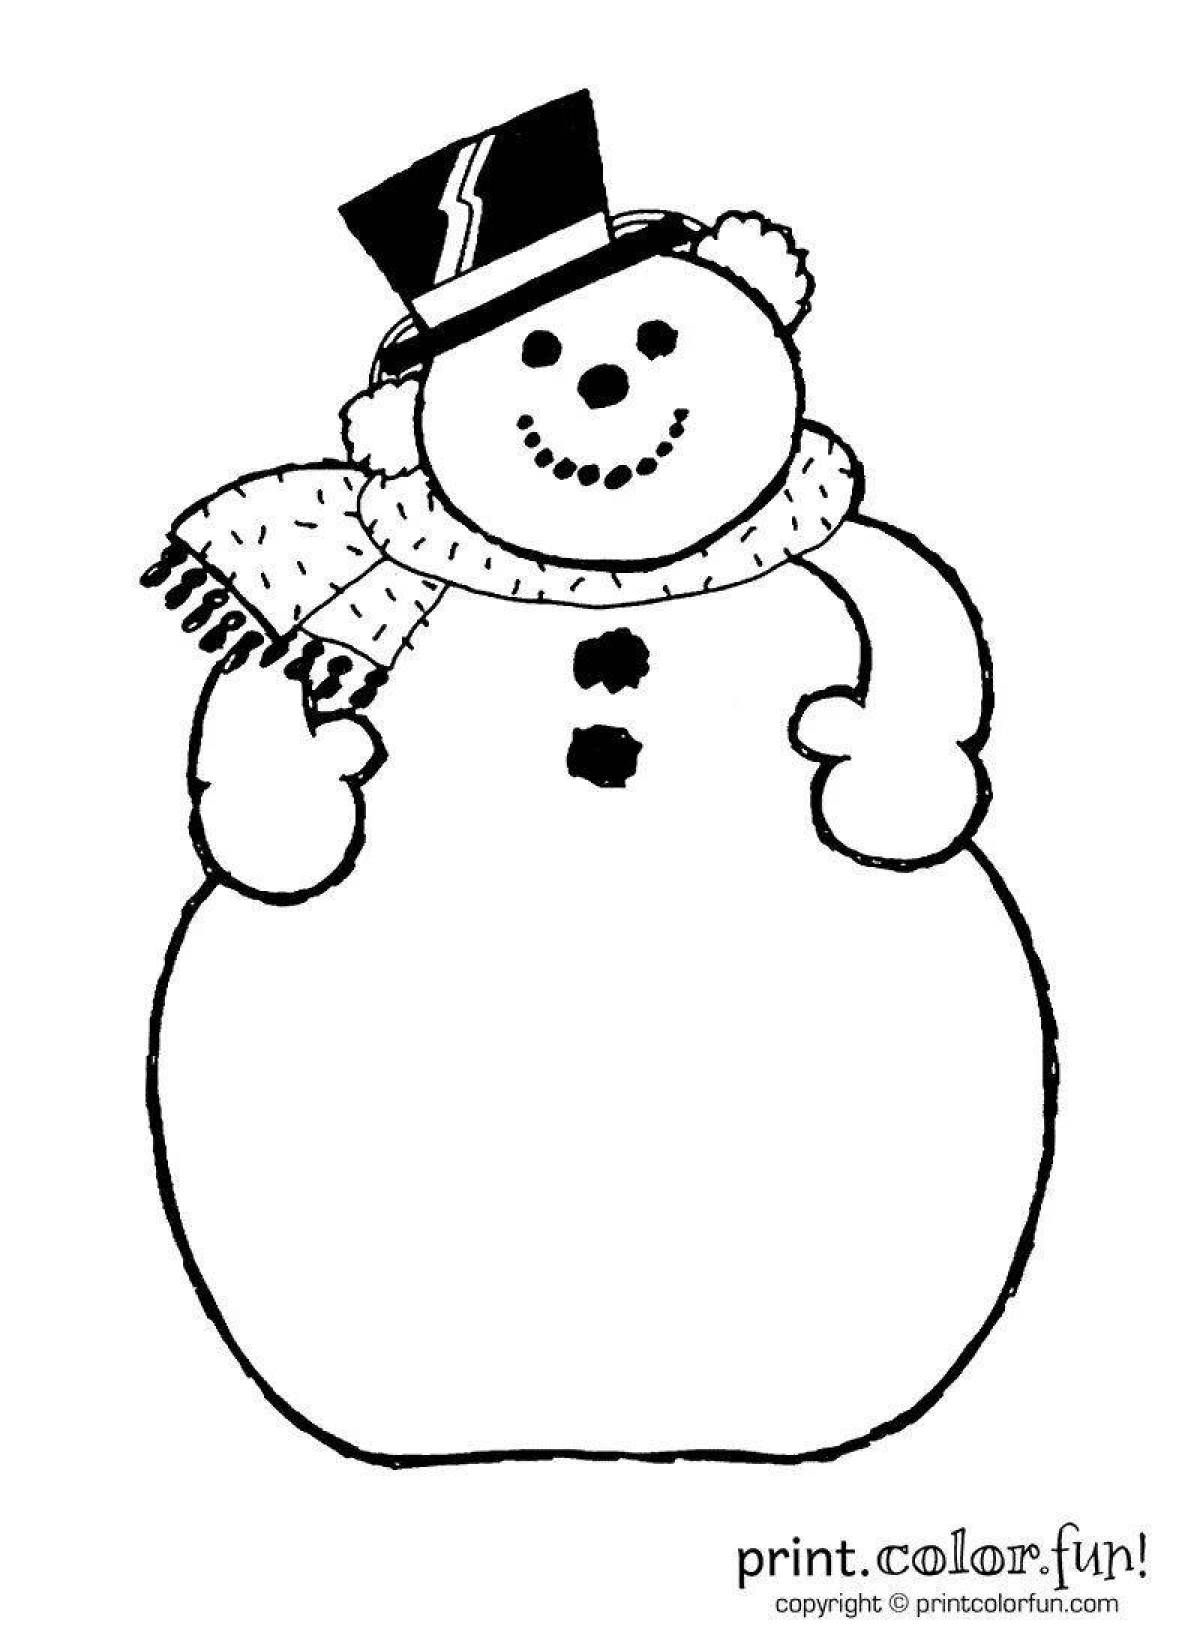 Fun coloring snowman without a nose